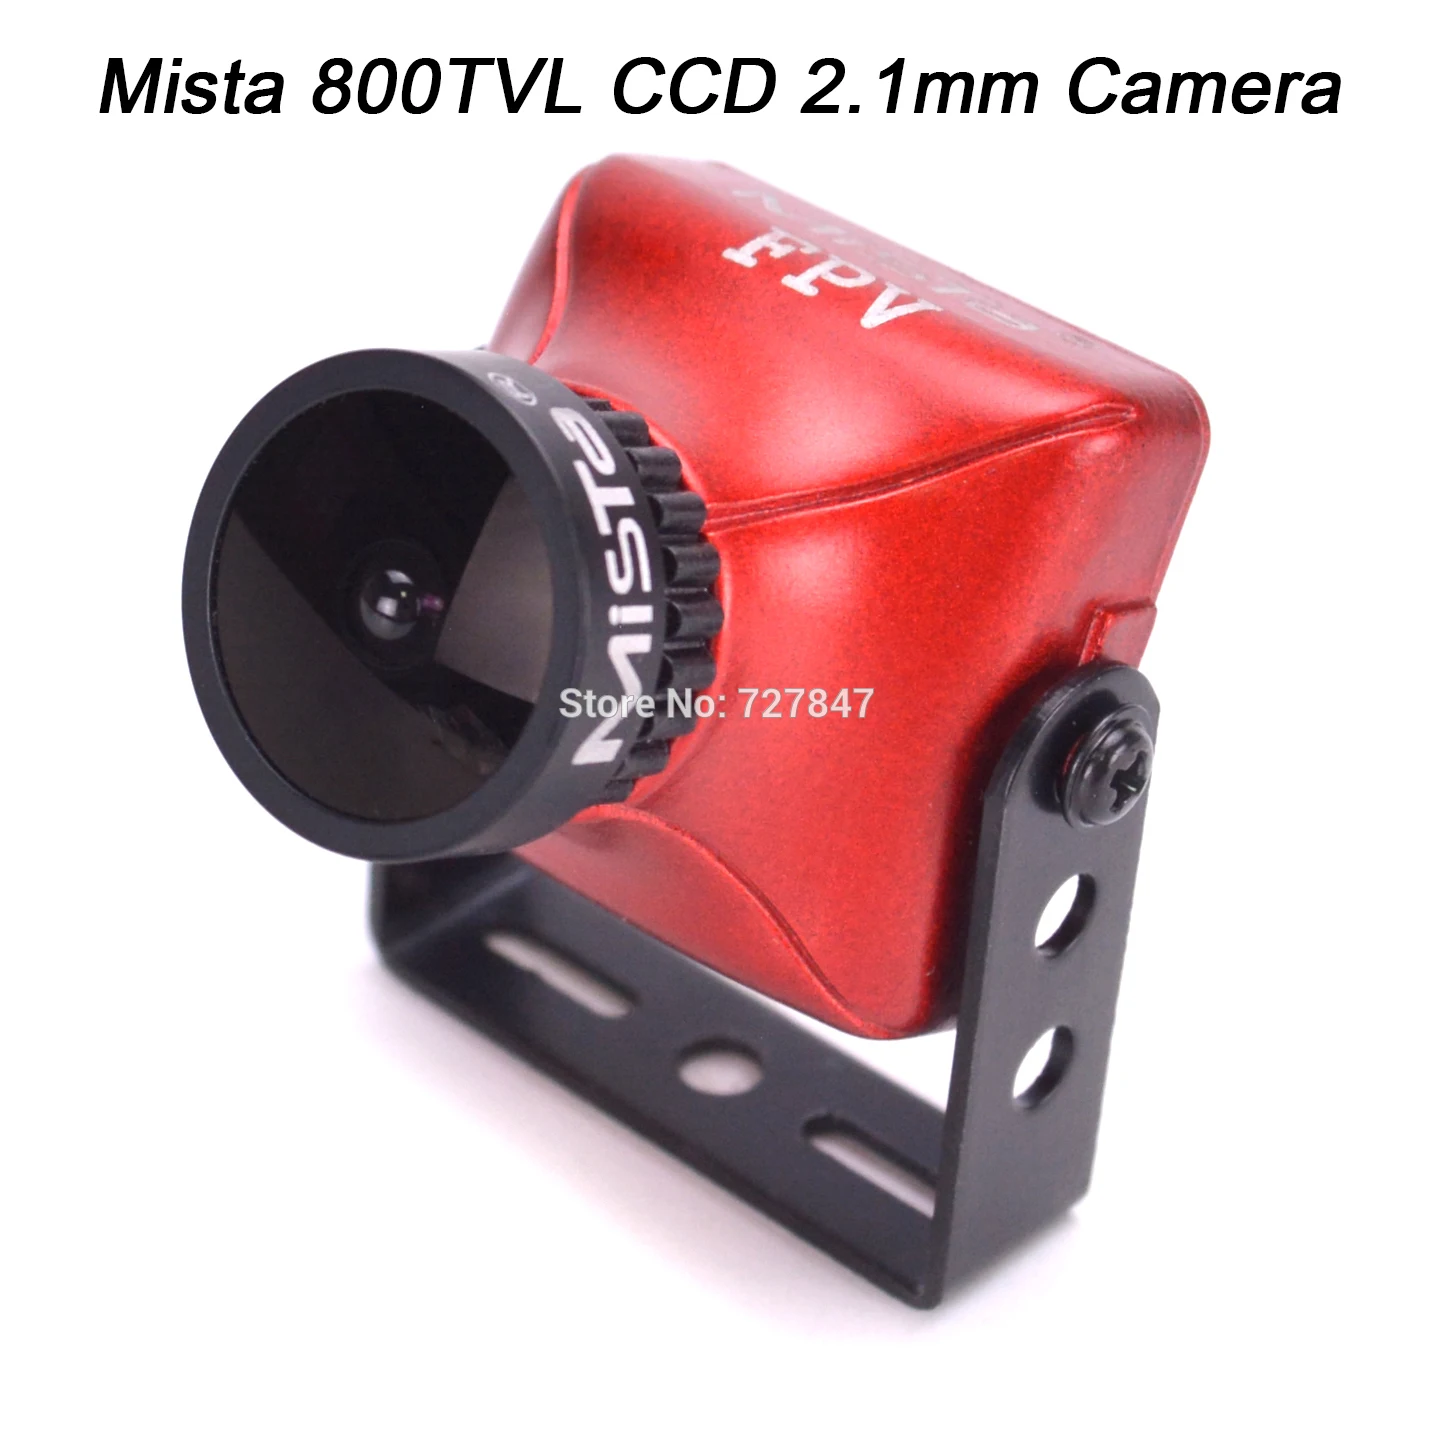 

Upgraded HD Mista 800TVL CCD 2.1mm Wide Angle HD 1080P 16:9 OSD FPV Camera PAL / NTSC Switchable For RC Quadcopter Model Drone